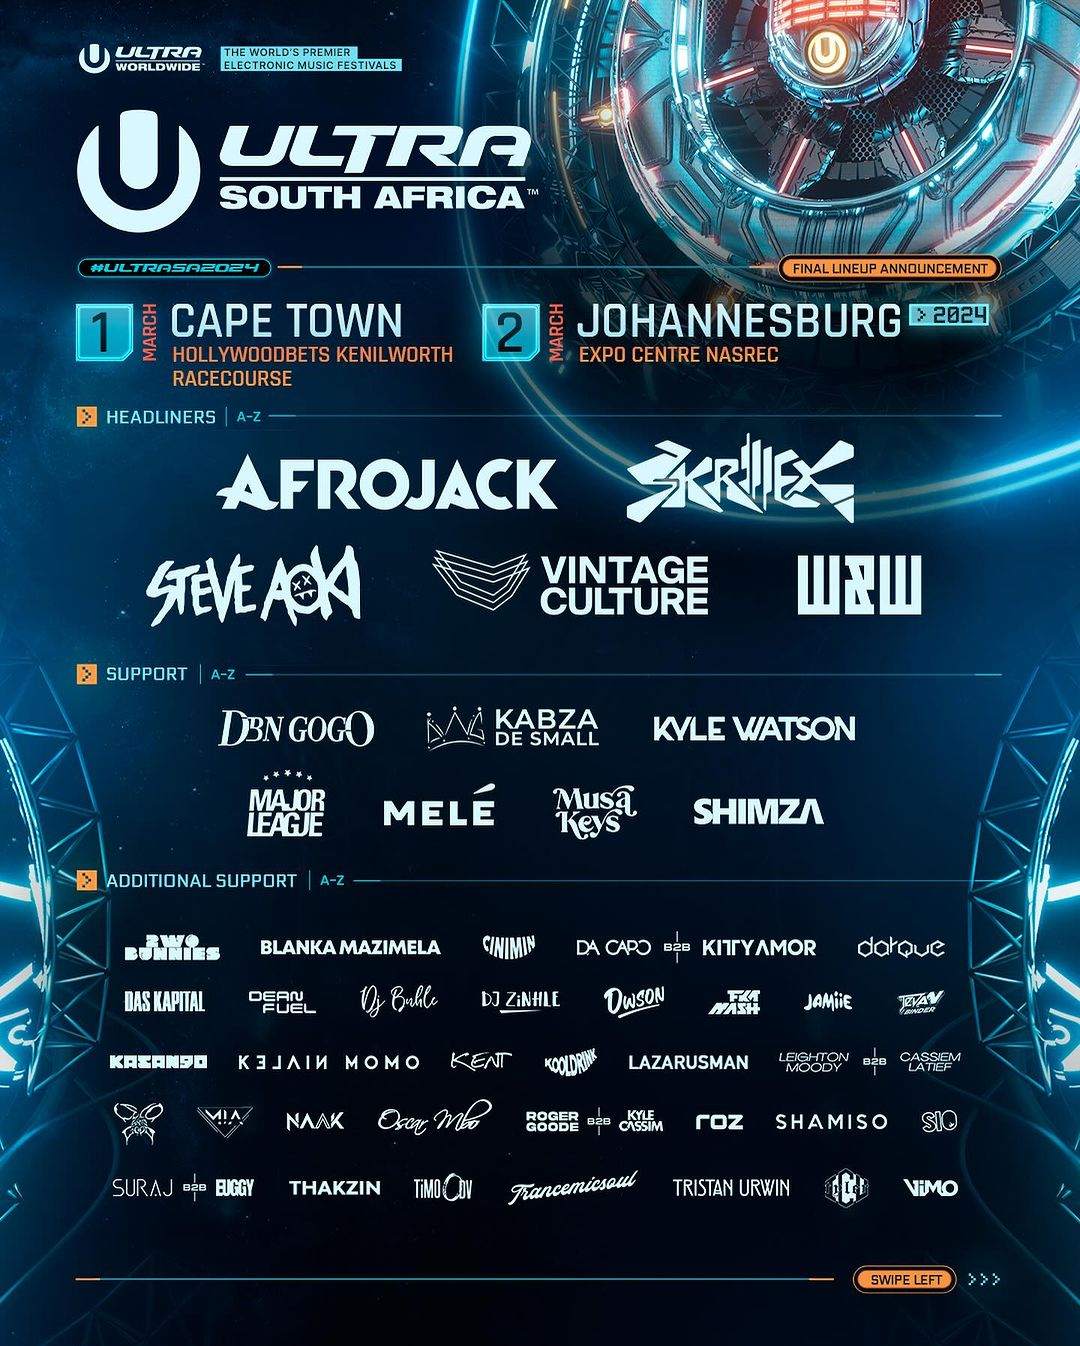 Ultra South Africa - フライヤー表